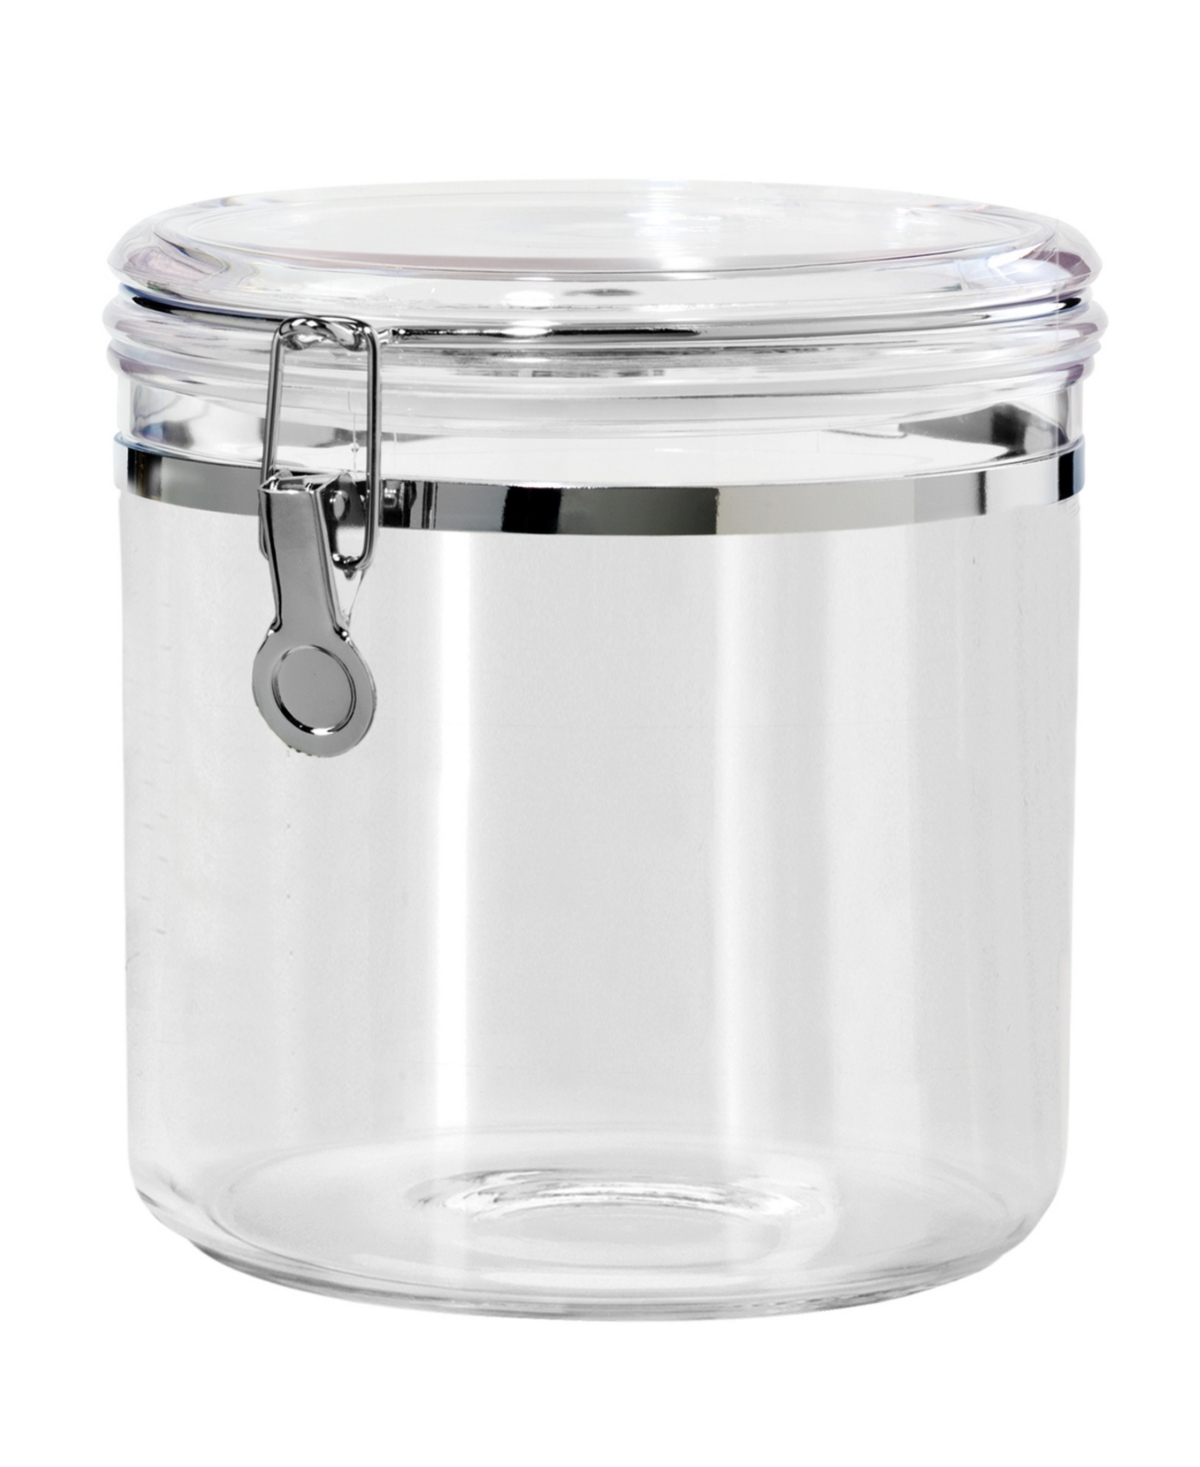 Oggi Jumbo 150 oz Airtight Canister With Clamp Lid In Clear